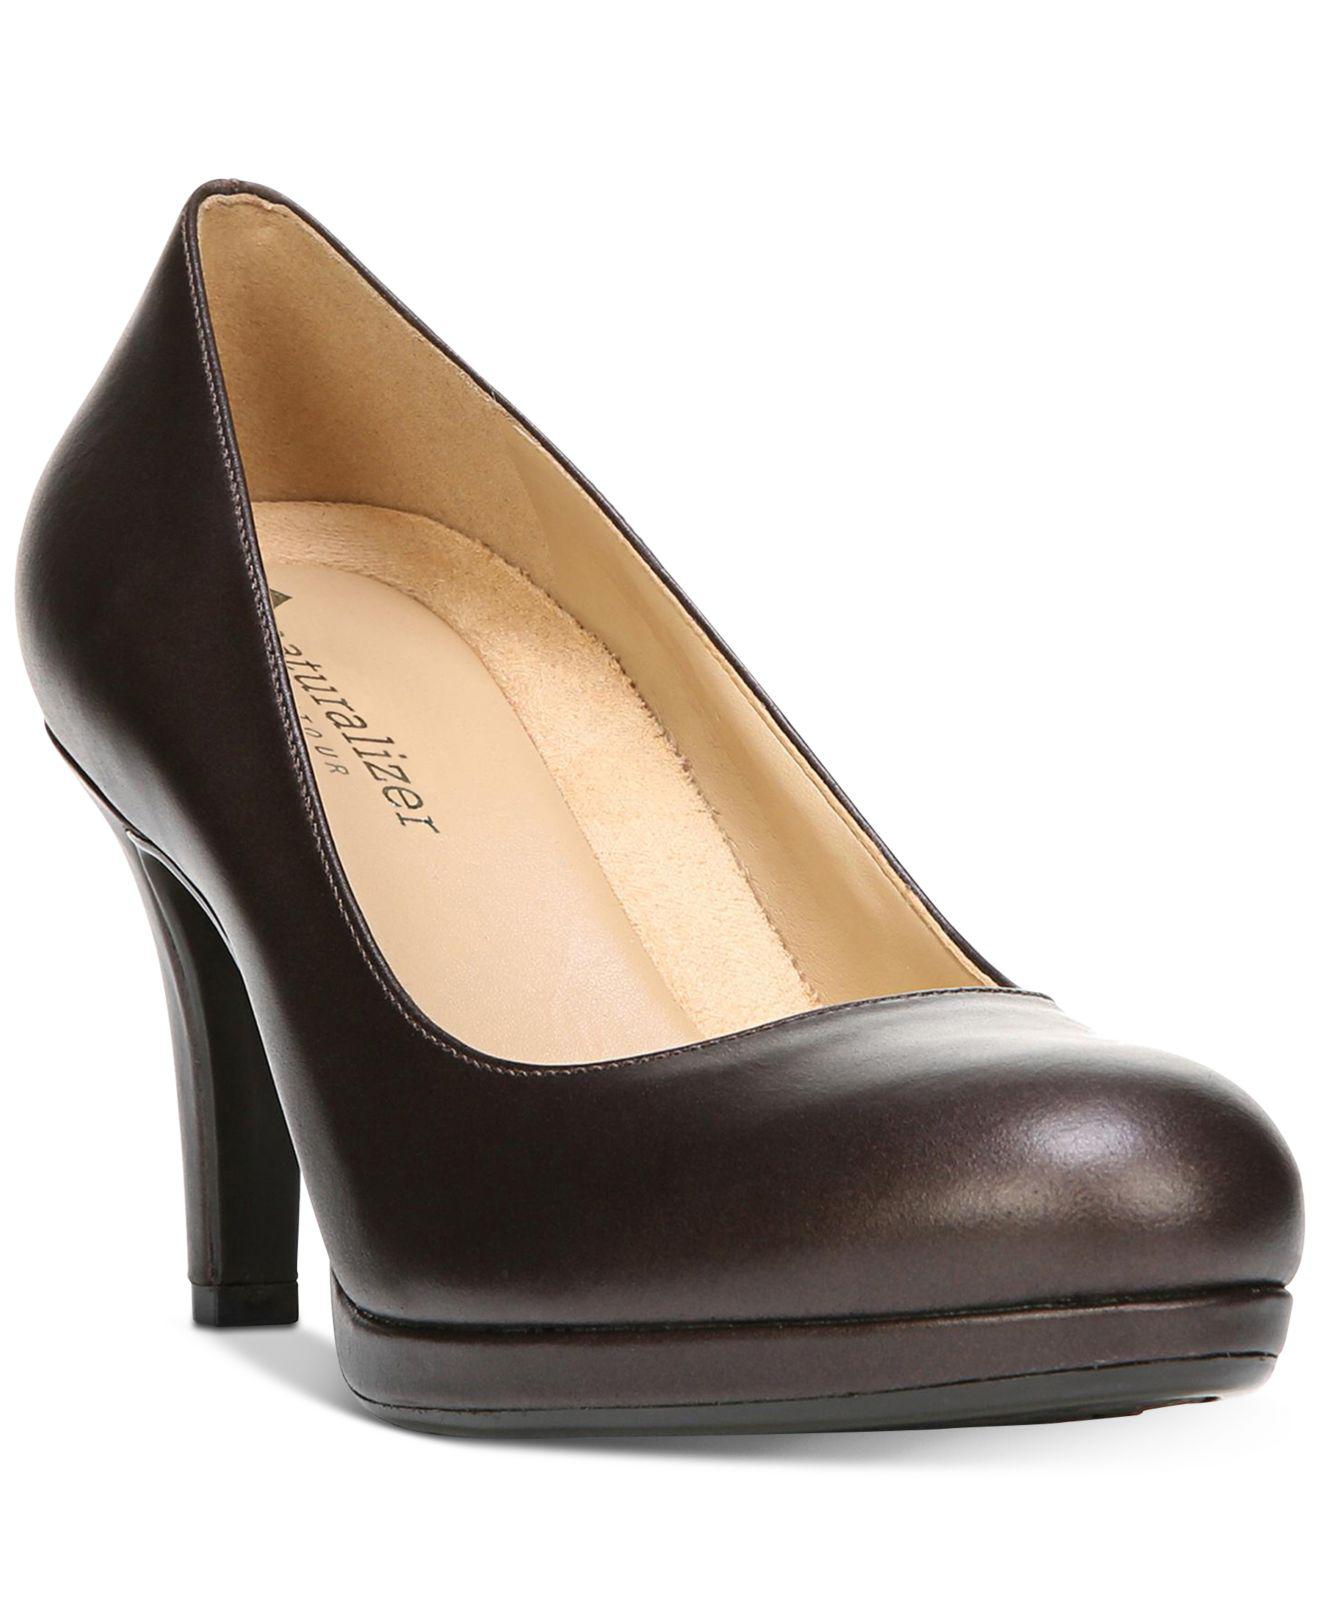 Lyst - Naturalizer Michelle Pumps in Brown